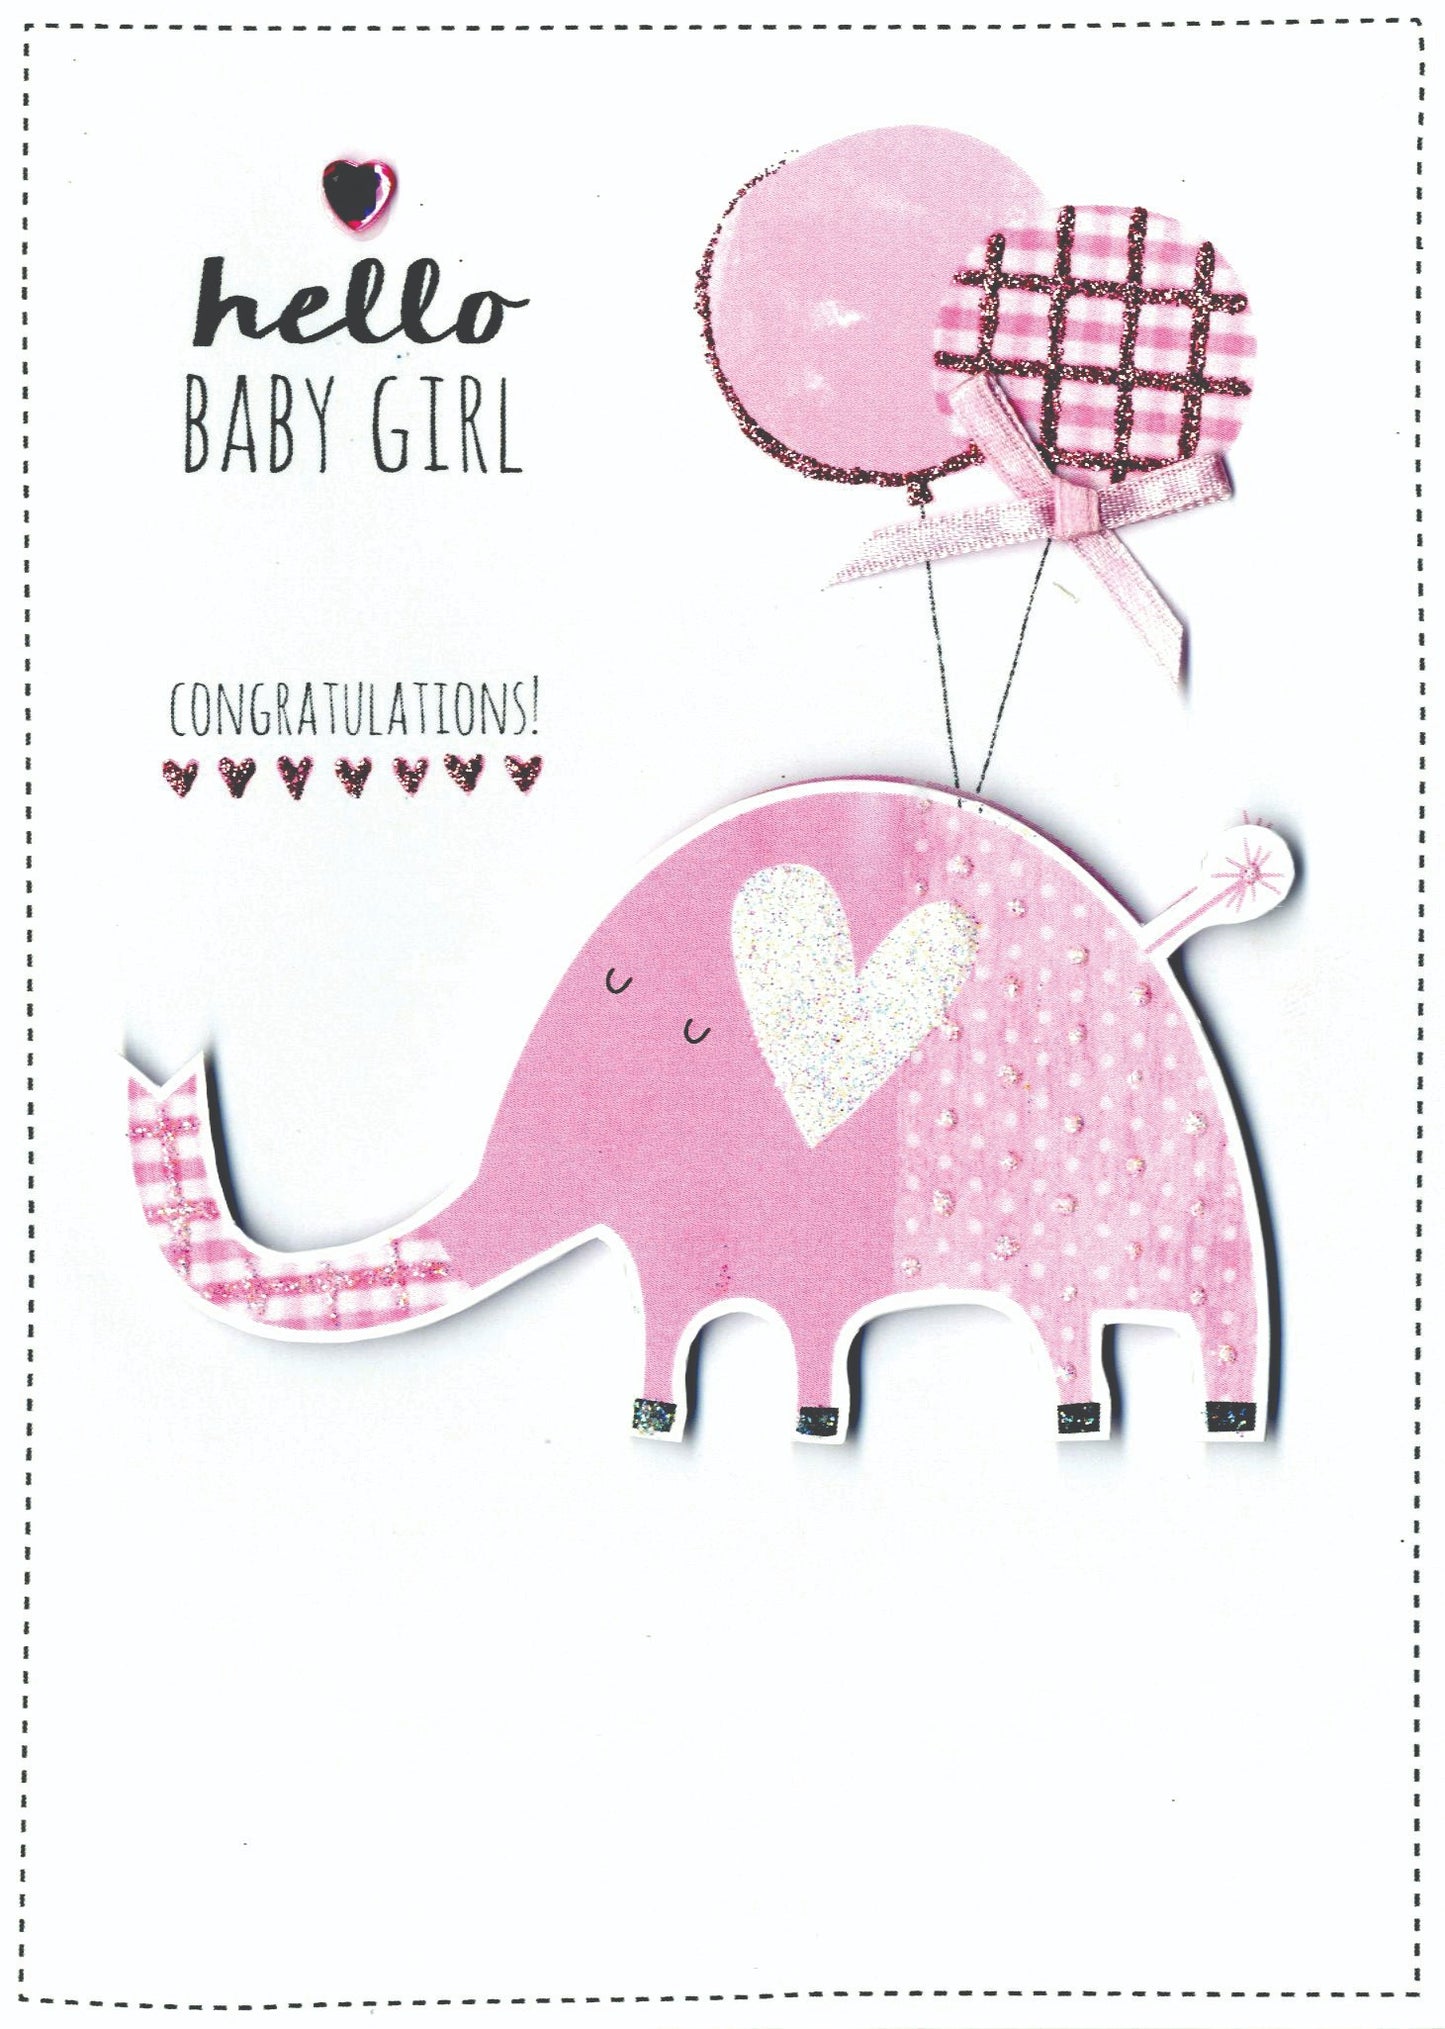 Baby Girl Congratulations New Baby Greeting Card